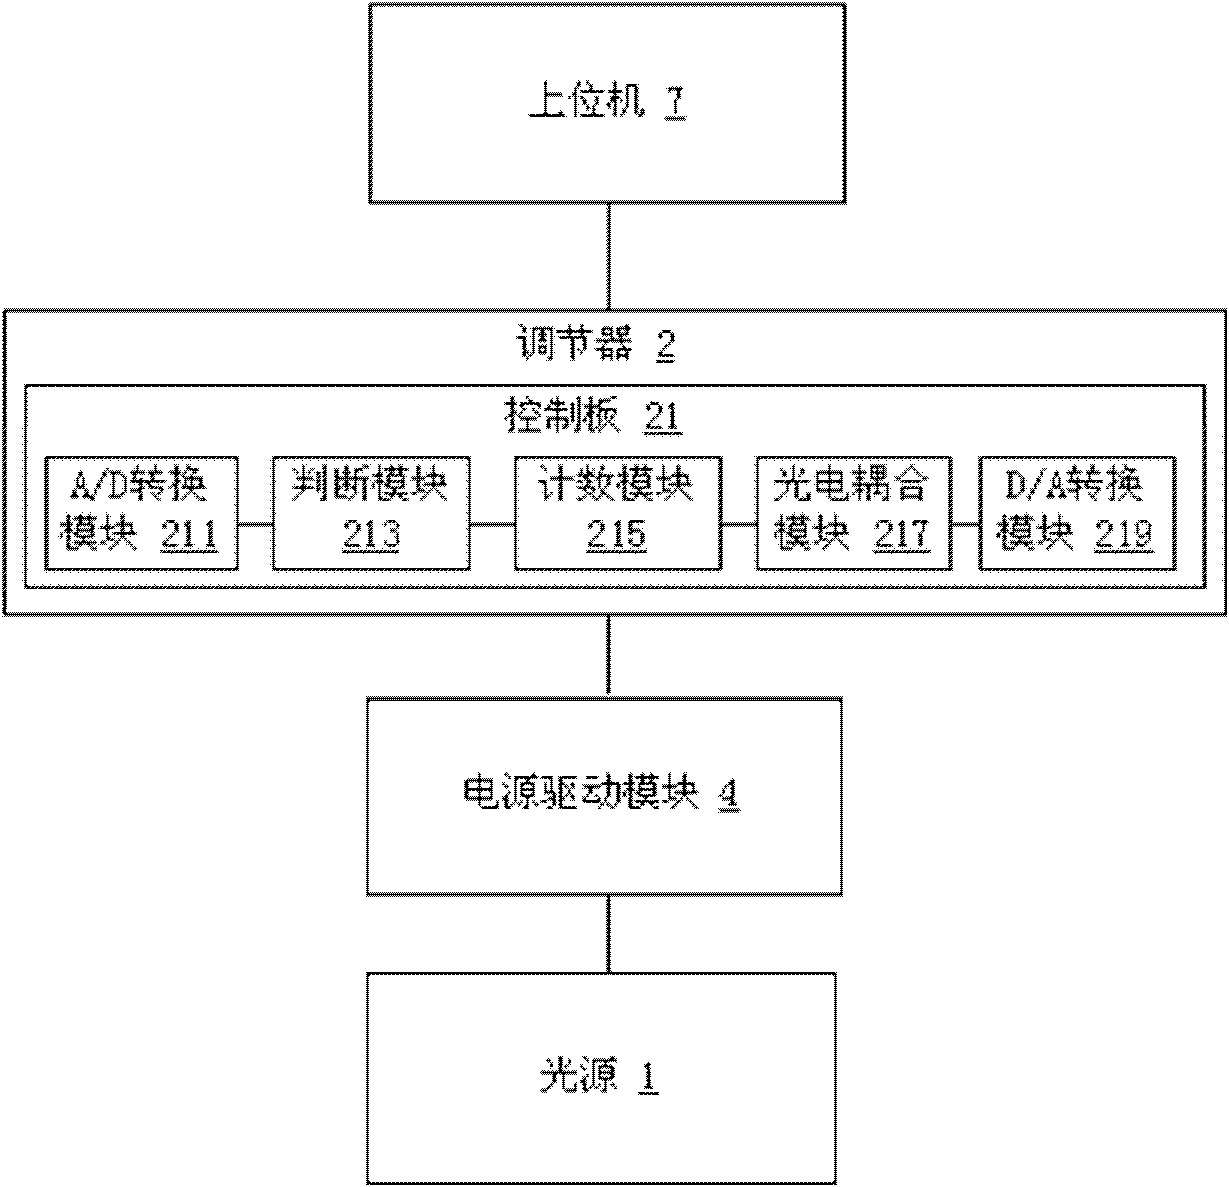 Perambulated inspection system and method